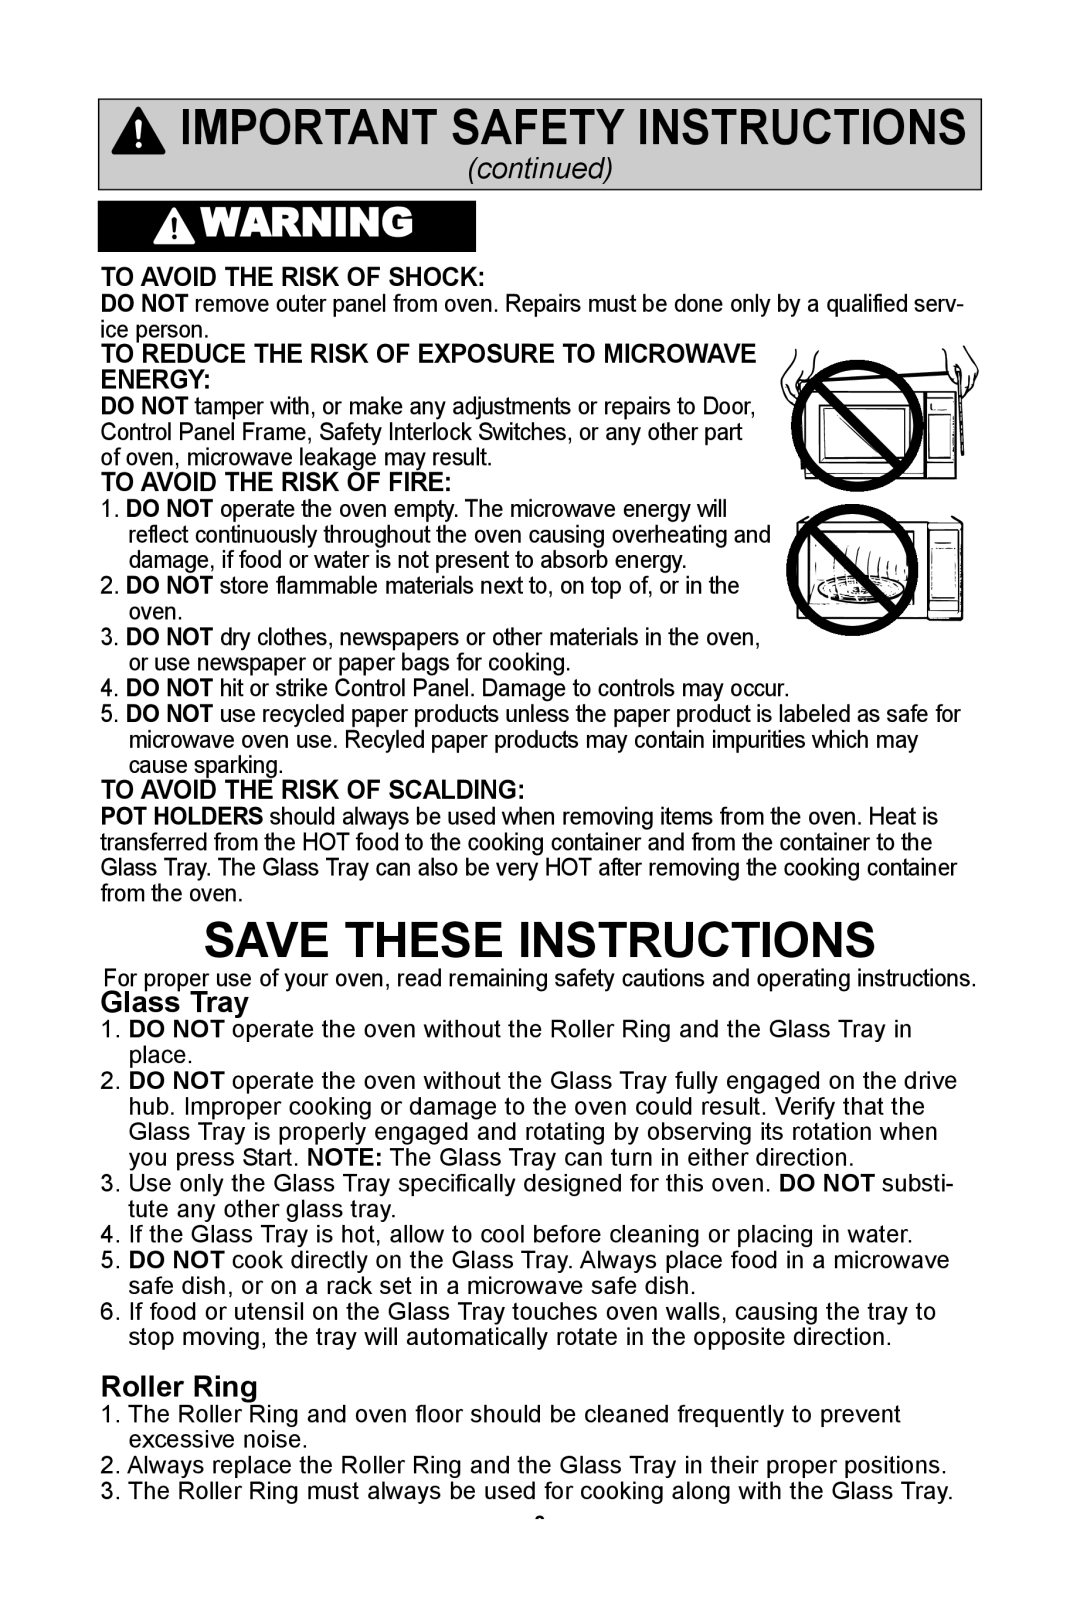 Panasonic NN-SD681S SaVe THeSe InSTrUcTIOnS, roller ring, TO aVOID THe rISK Of SHOcK, TO aVOID THe rISK Of fIre, continued 